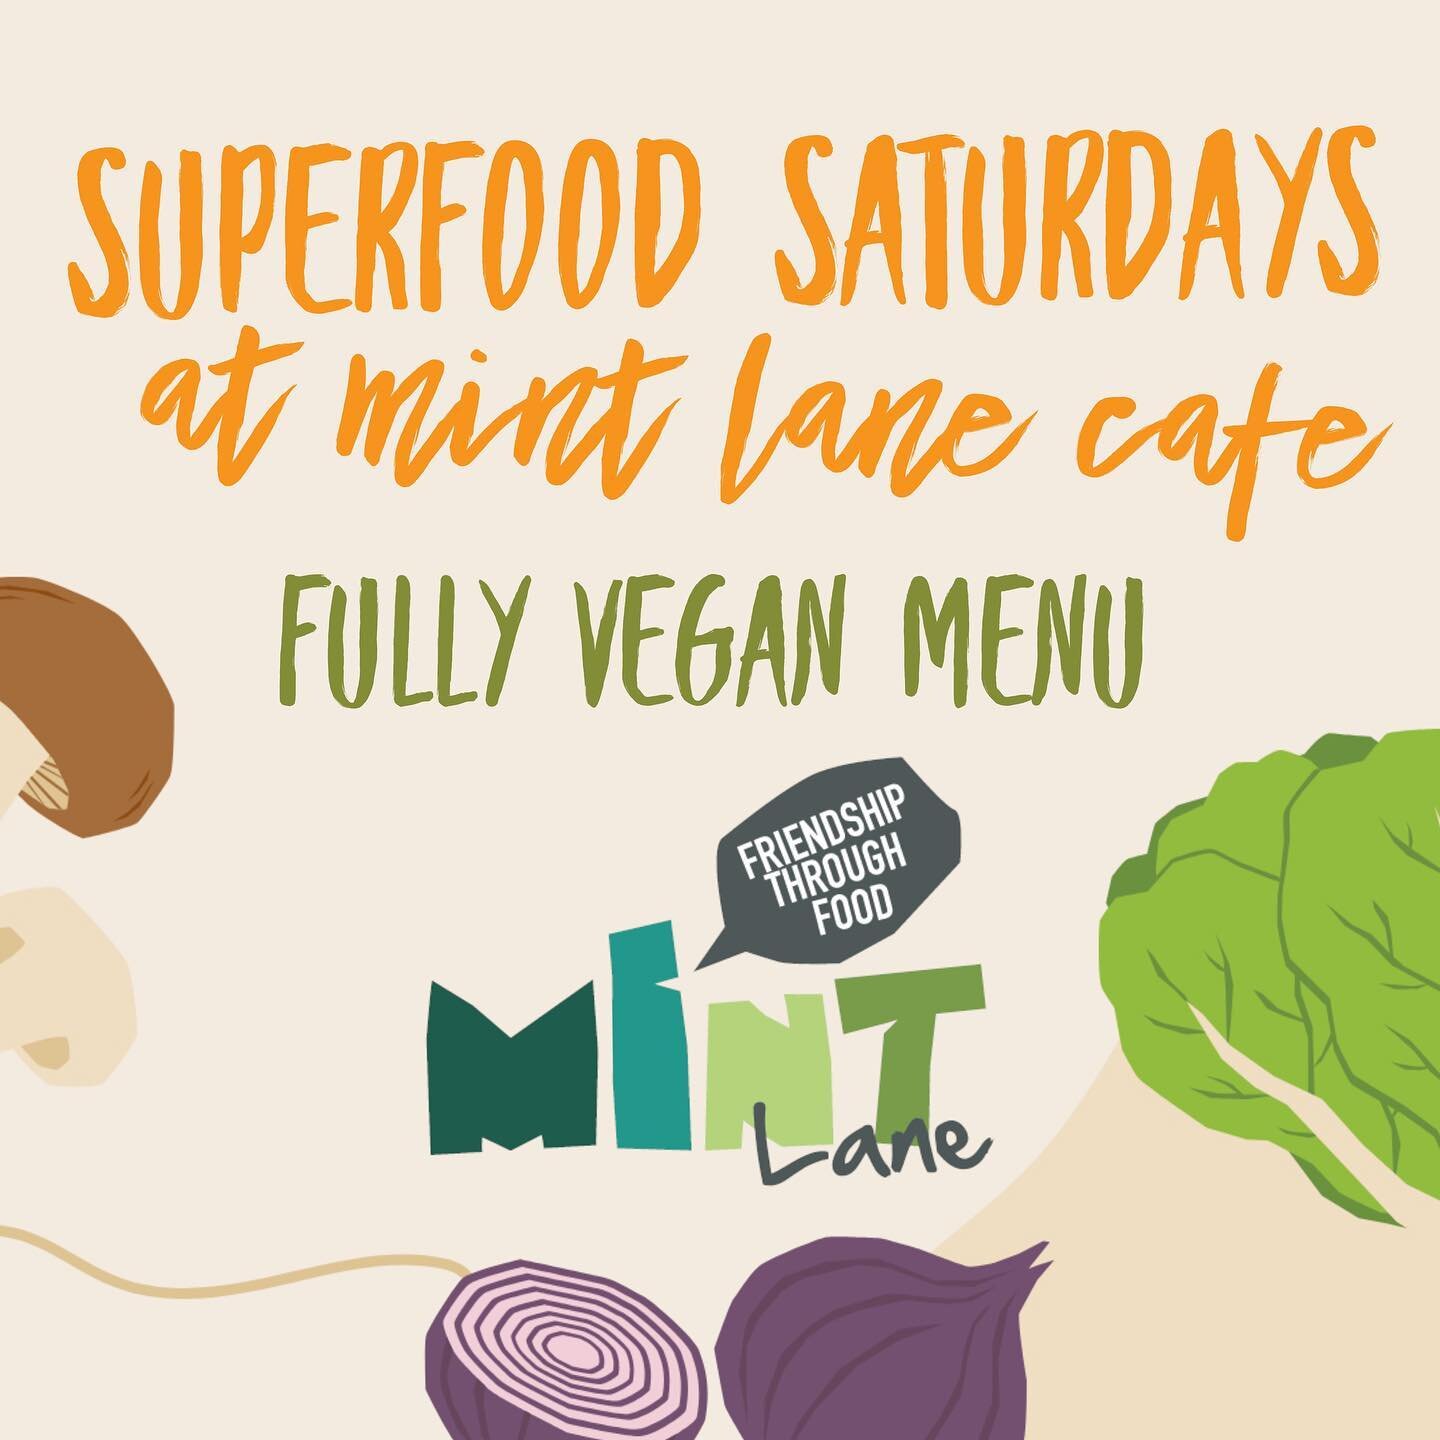 💚we&rsquo;ve created a great vegan menu for you tomorrow, superfood Saturday!💚
All vegan - all you have to choose is.. sweet or savoury? 

#vegan #surplus #superfood #saturday #cake #vegancake #curry #chilli #lincoln